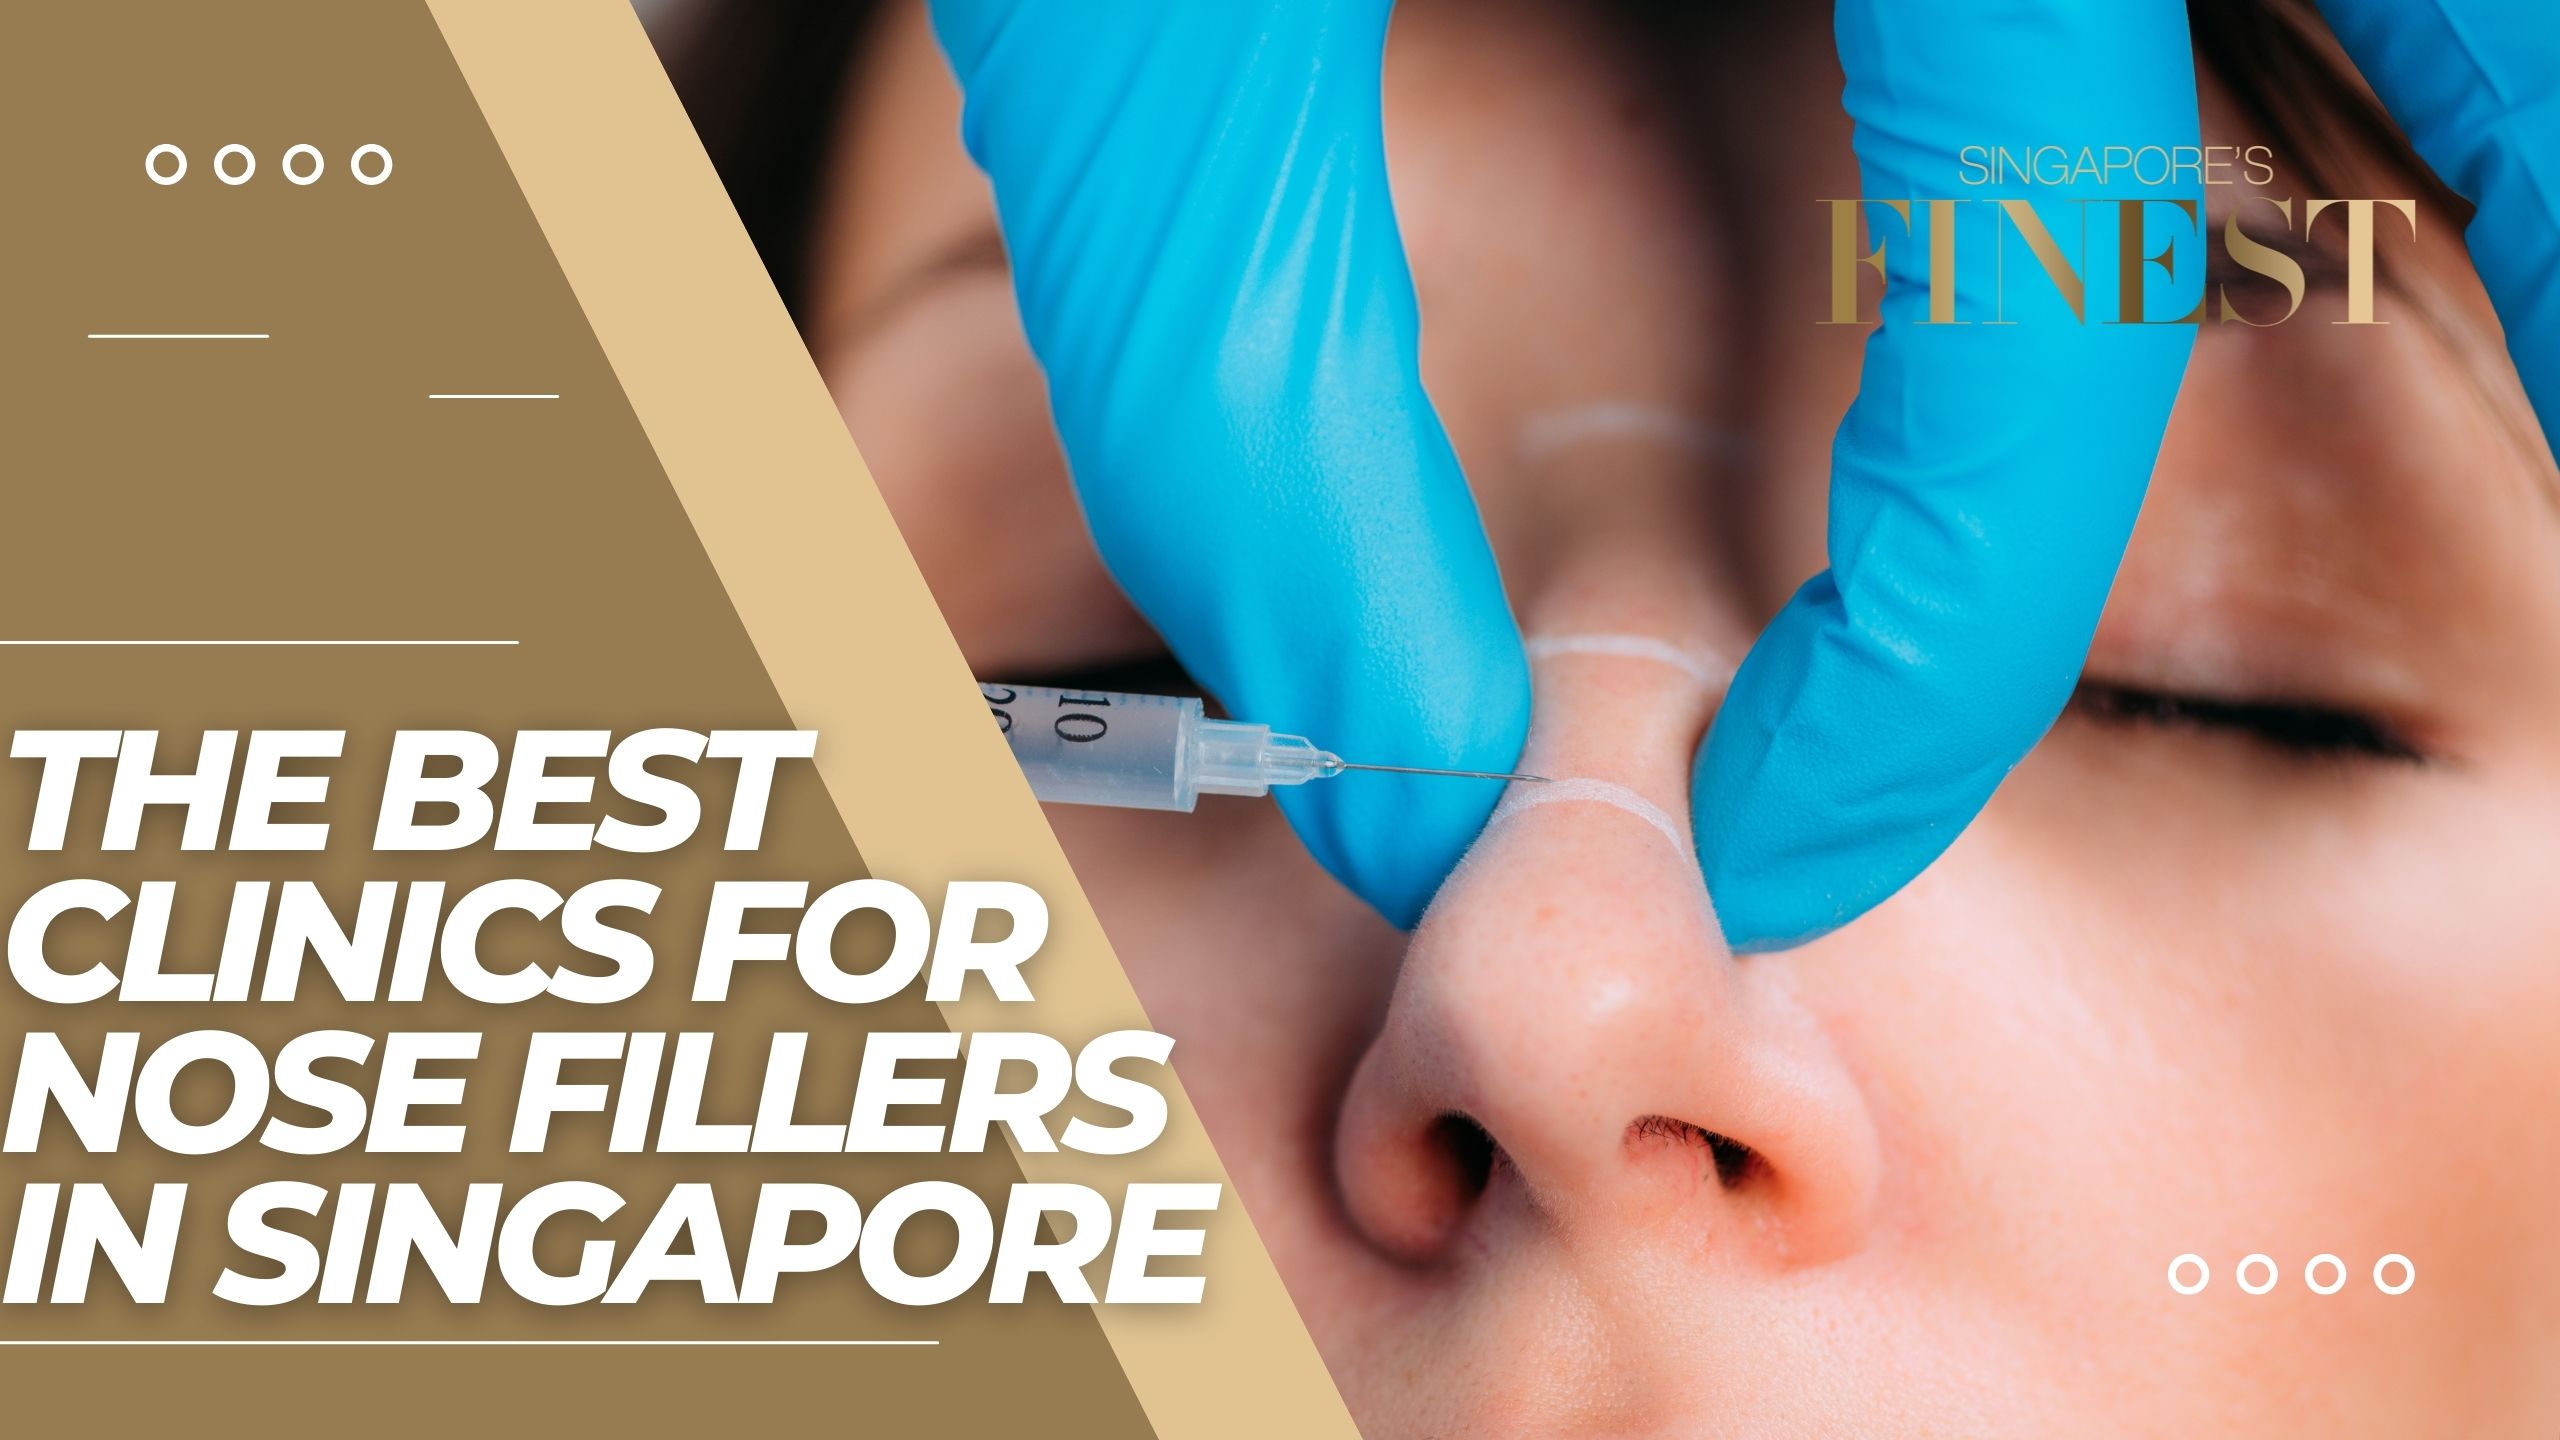 The Finest Clinics for Nose Fillers in Singapore